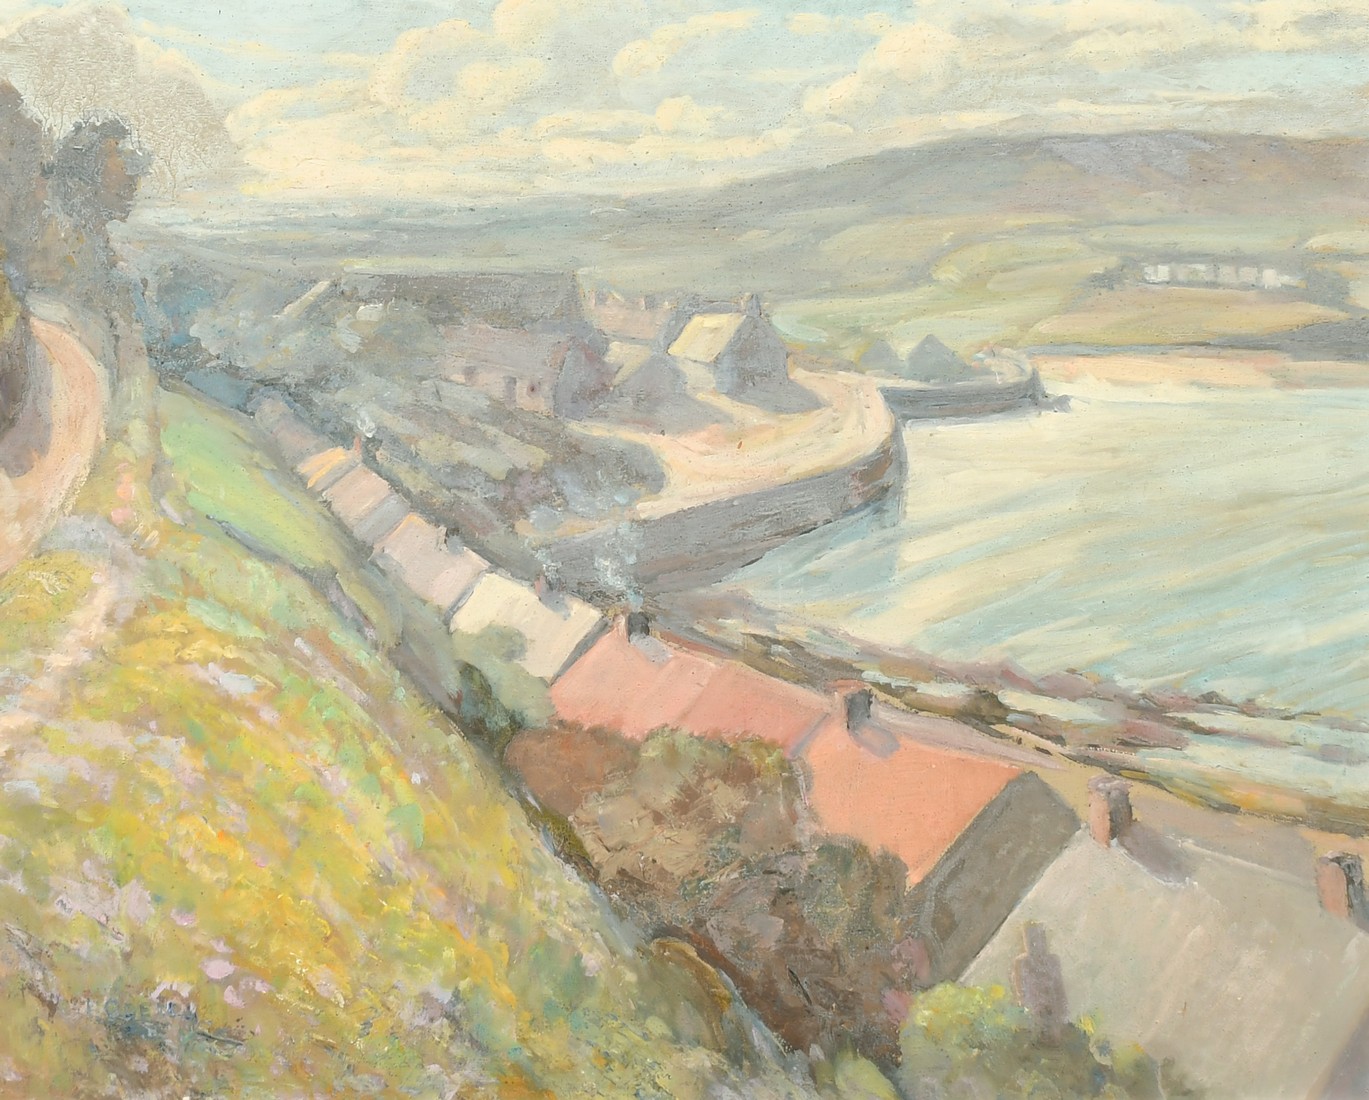 Odell, 20th Century, Possibly Irish, a view of a harbour town, oil on board, 20" x 24" (50 x 61cm).